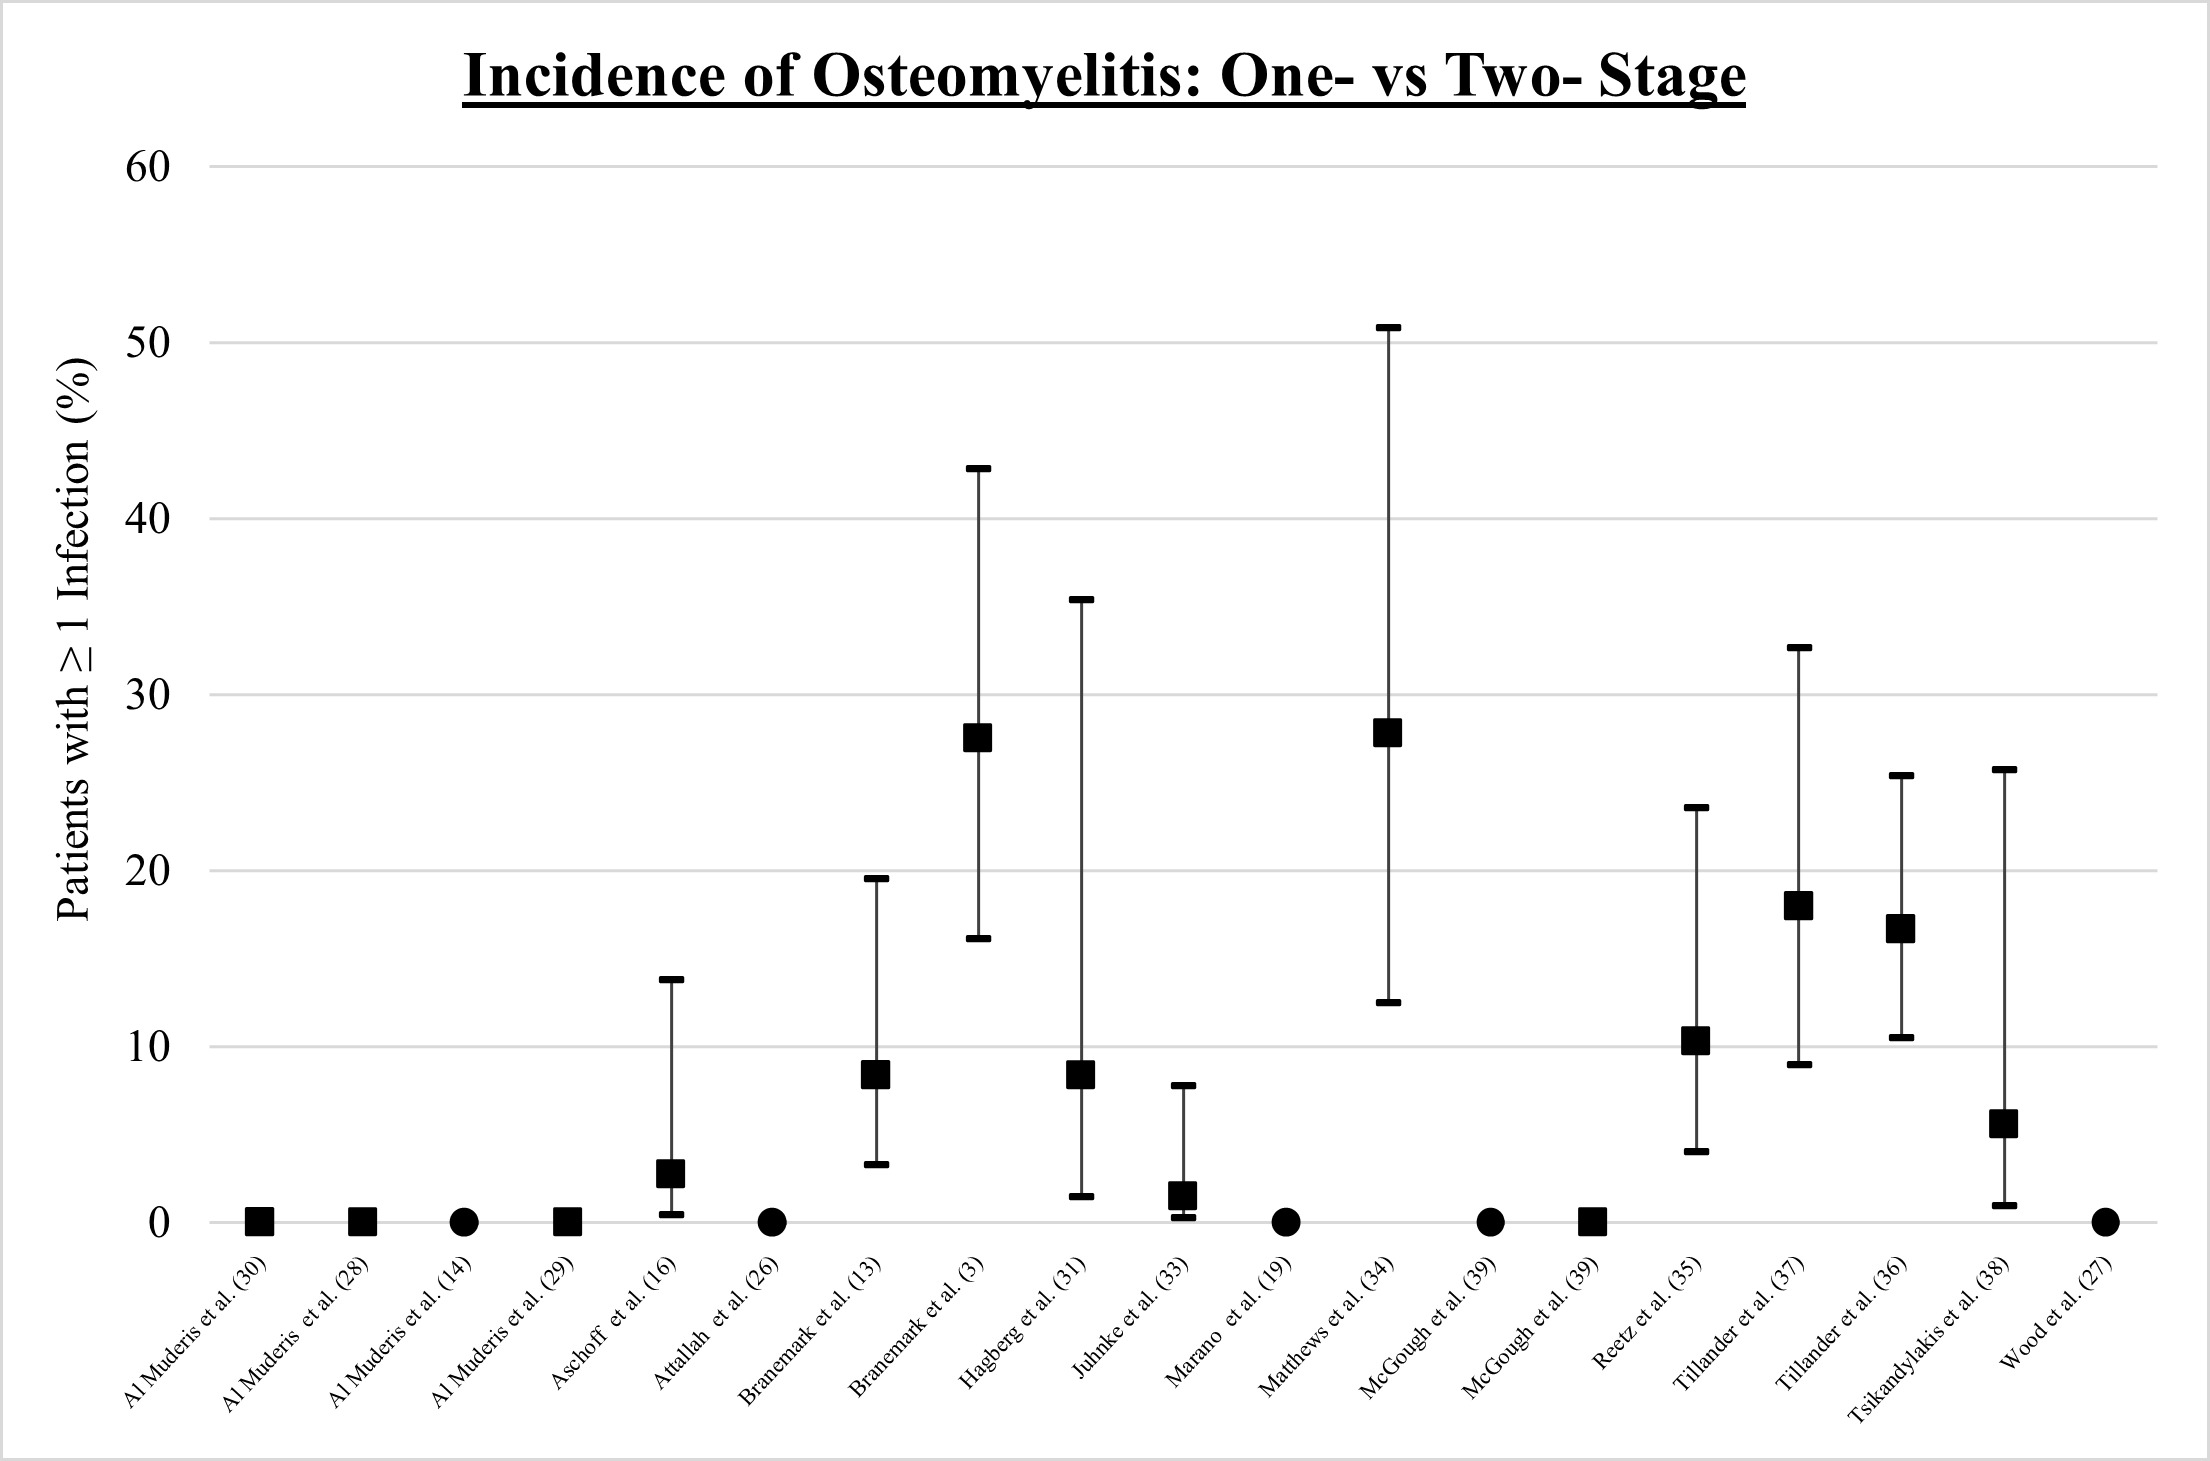 Fig. 4 
            Incidence of osteomyelitis with 95% confidence intervals: ● One-stage ■ Two-stage.
          